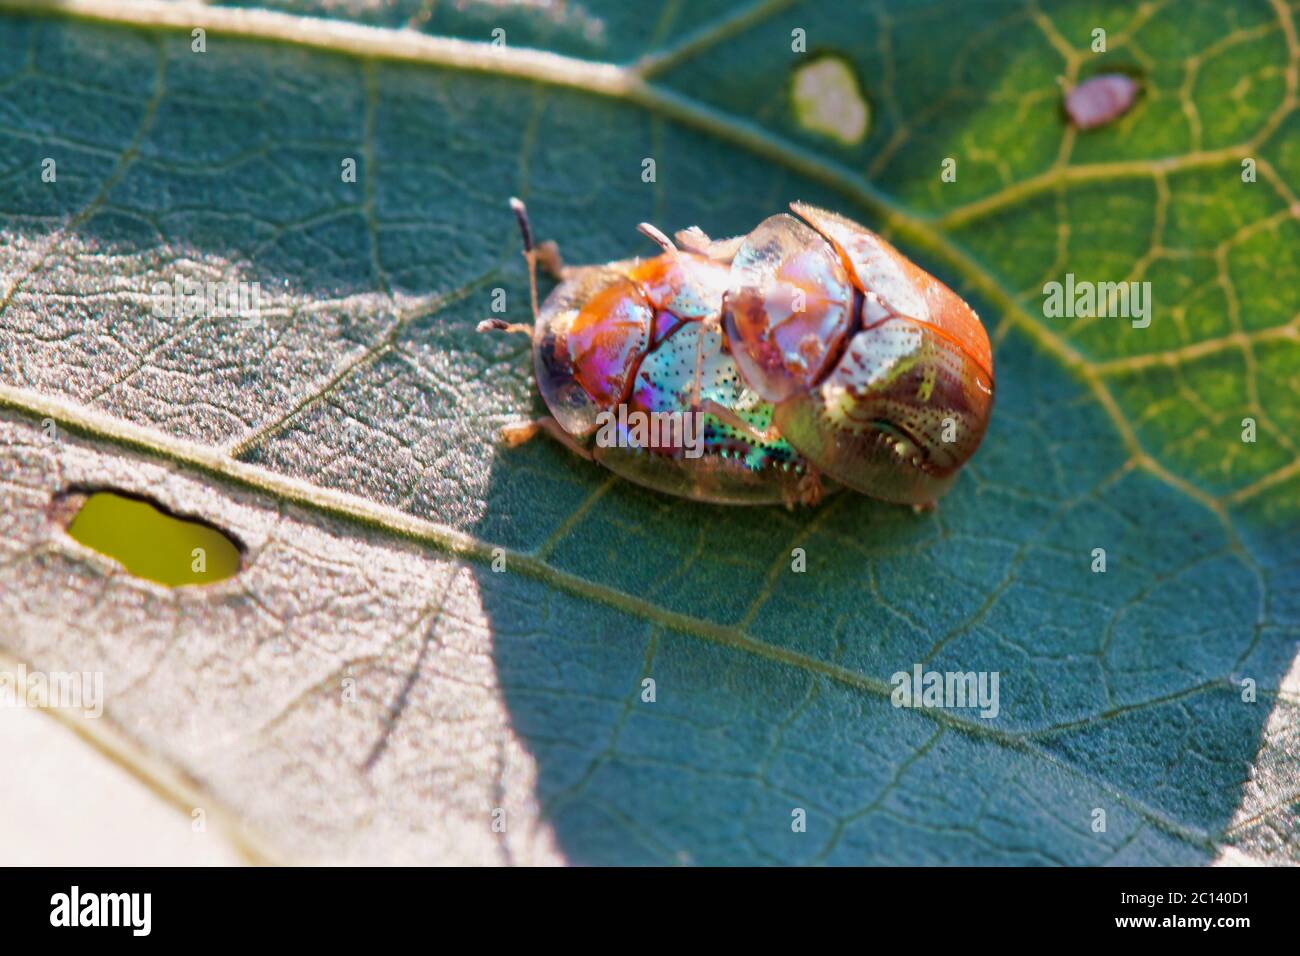 beautiful beetles reproducing on a leaf Stock Photo